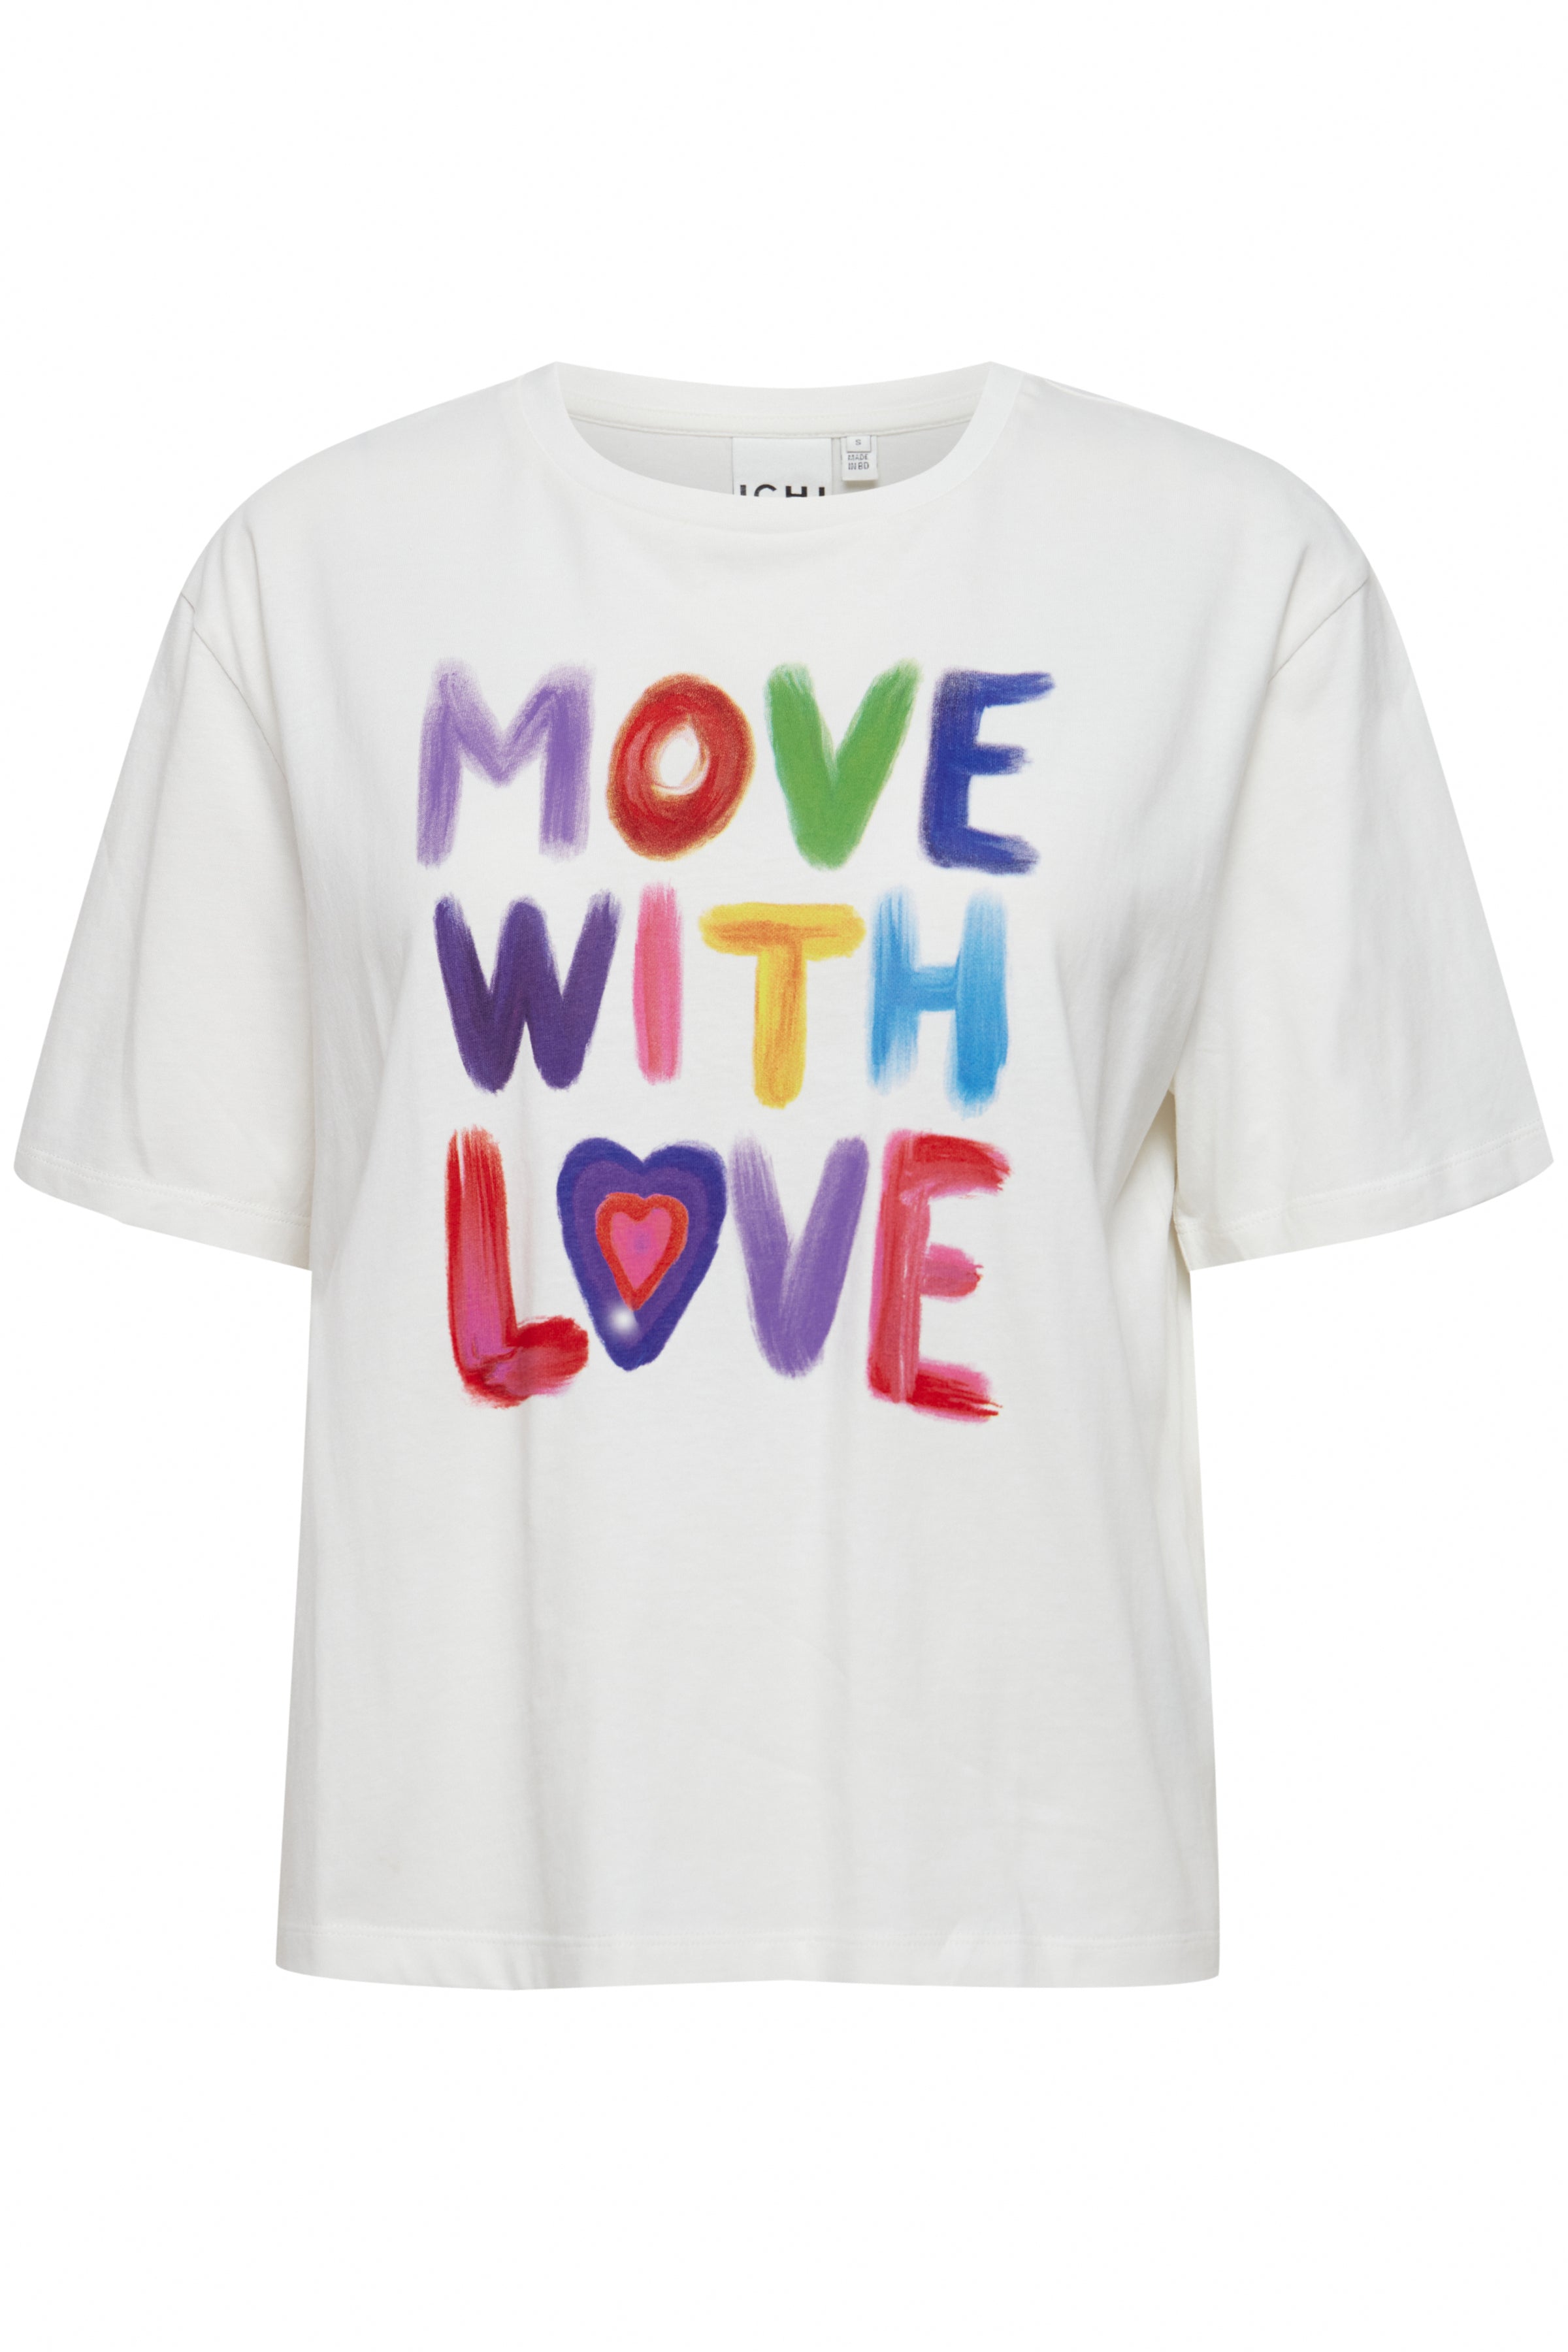 MOVE WITH LOVE T-SHIRT (CLOUD DANCER)